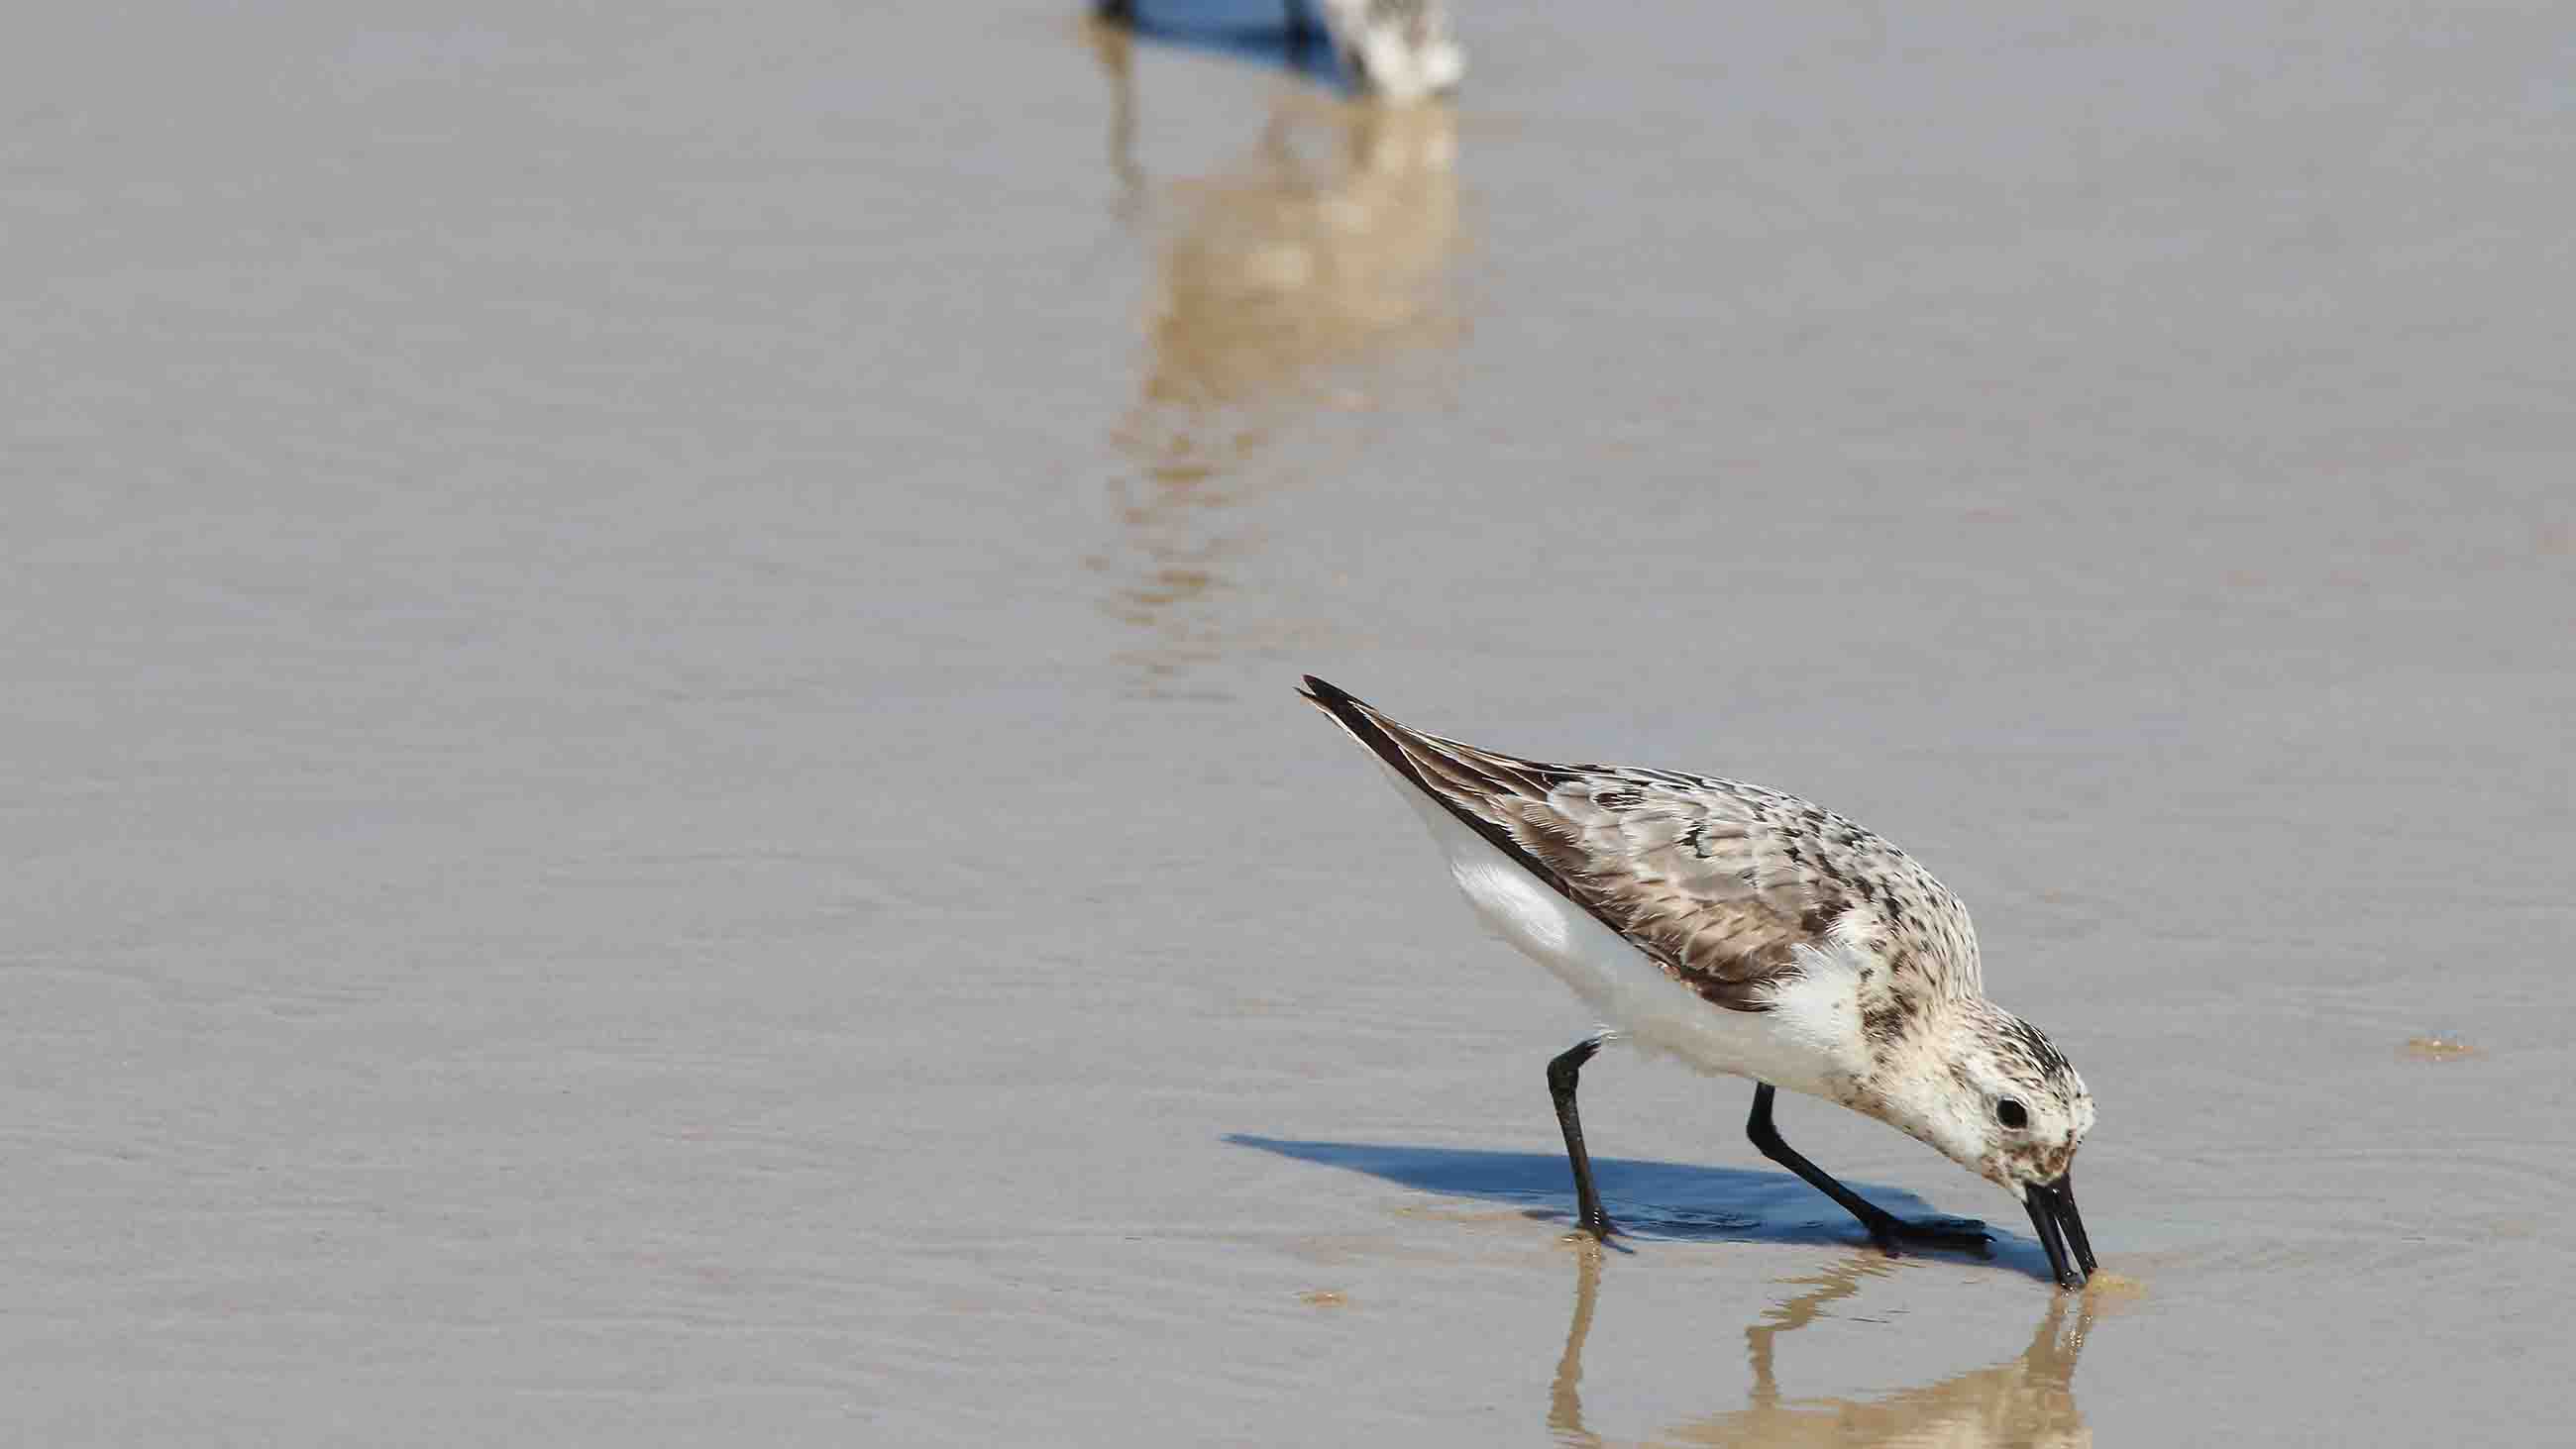 In a recent study, sandpipers that had oil brushed along their wingtips and tails expended 22 percent more energy than their oil-free counterparts.